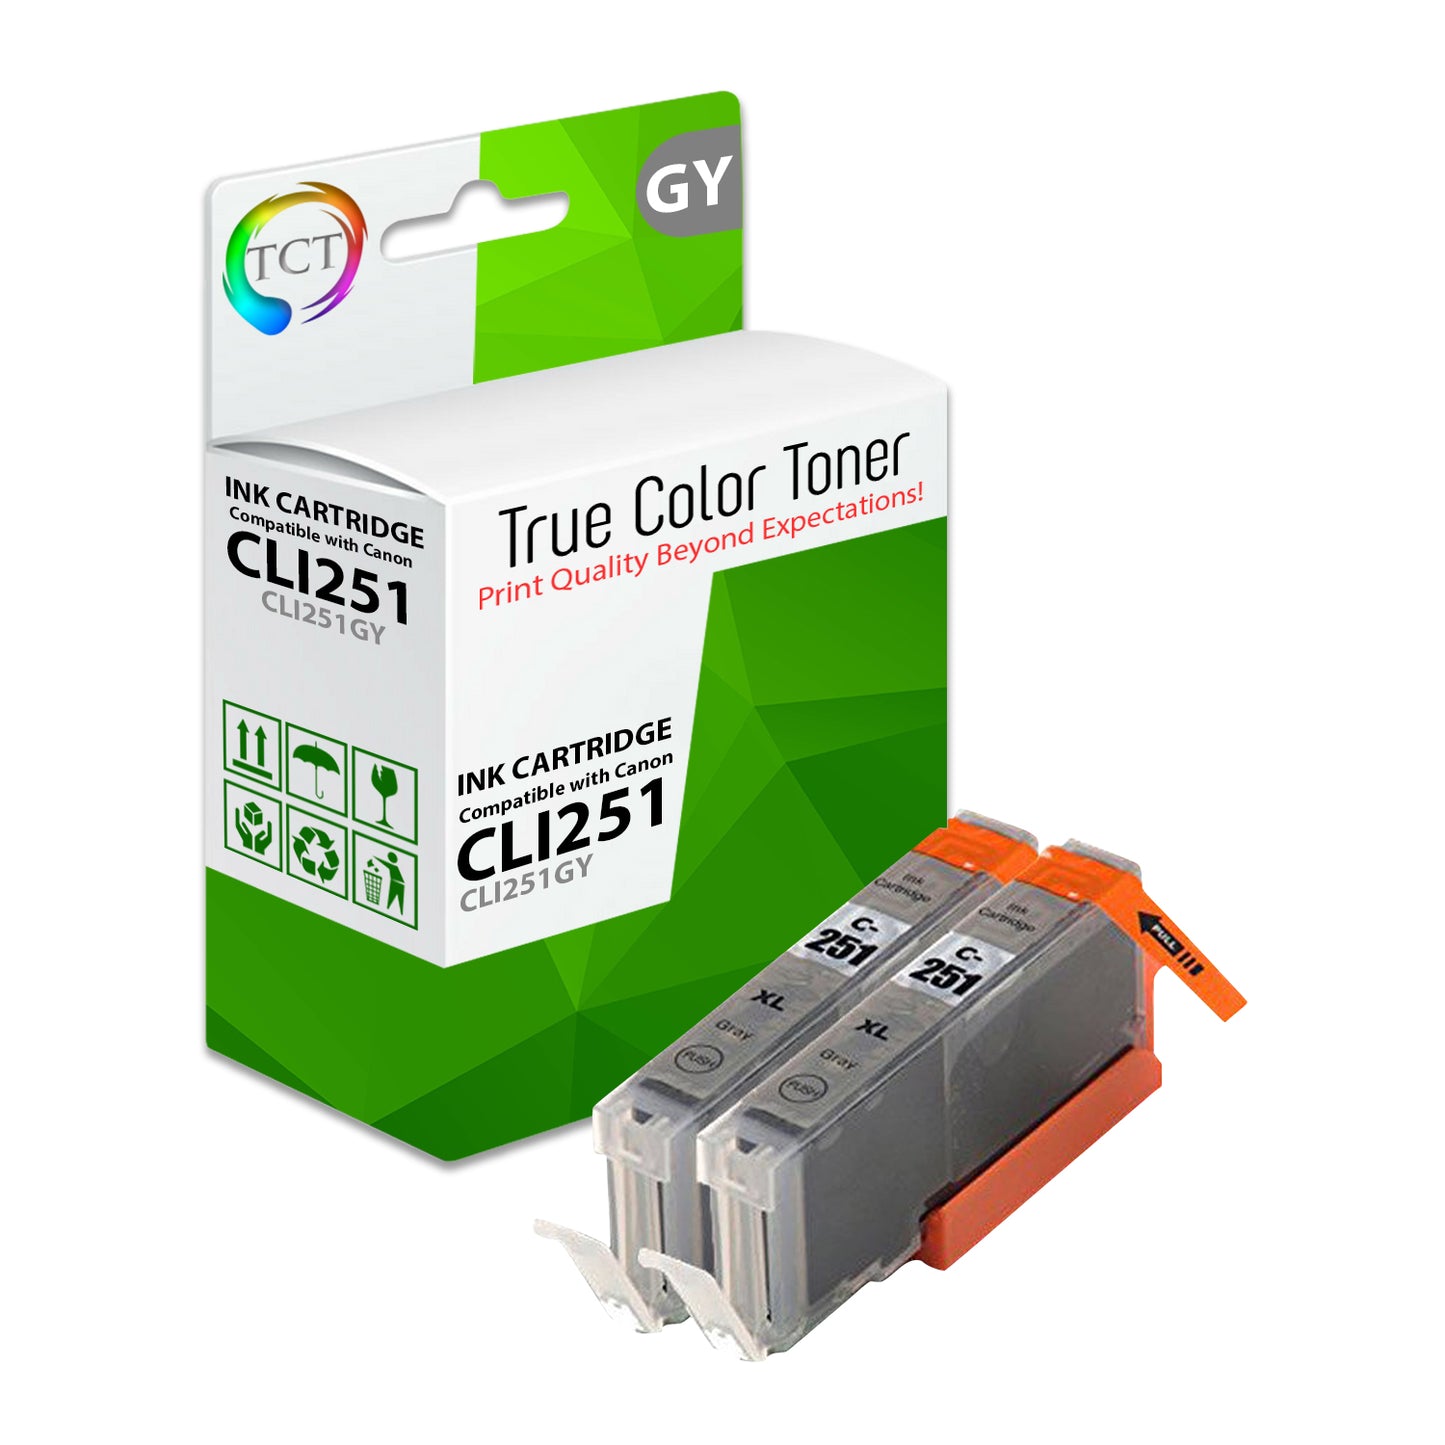 TCT Compatible Ink Cartridge Replacement for the Canon CLI-251 Series - 2 Pack Gray